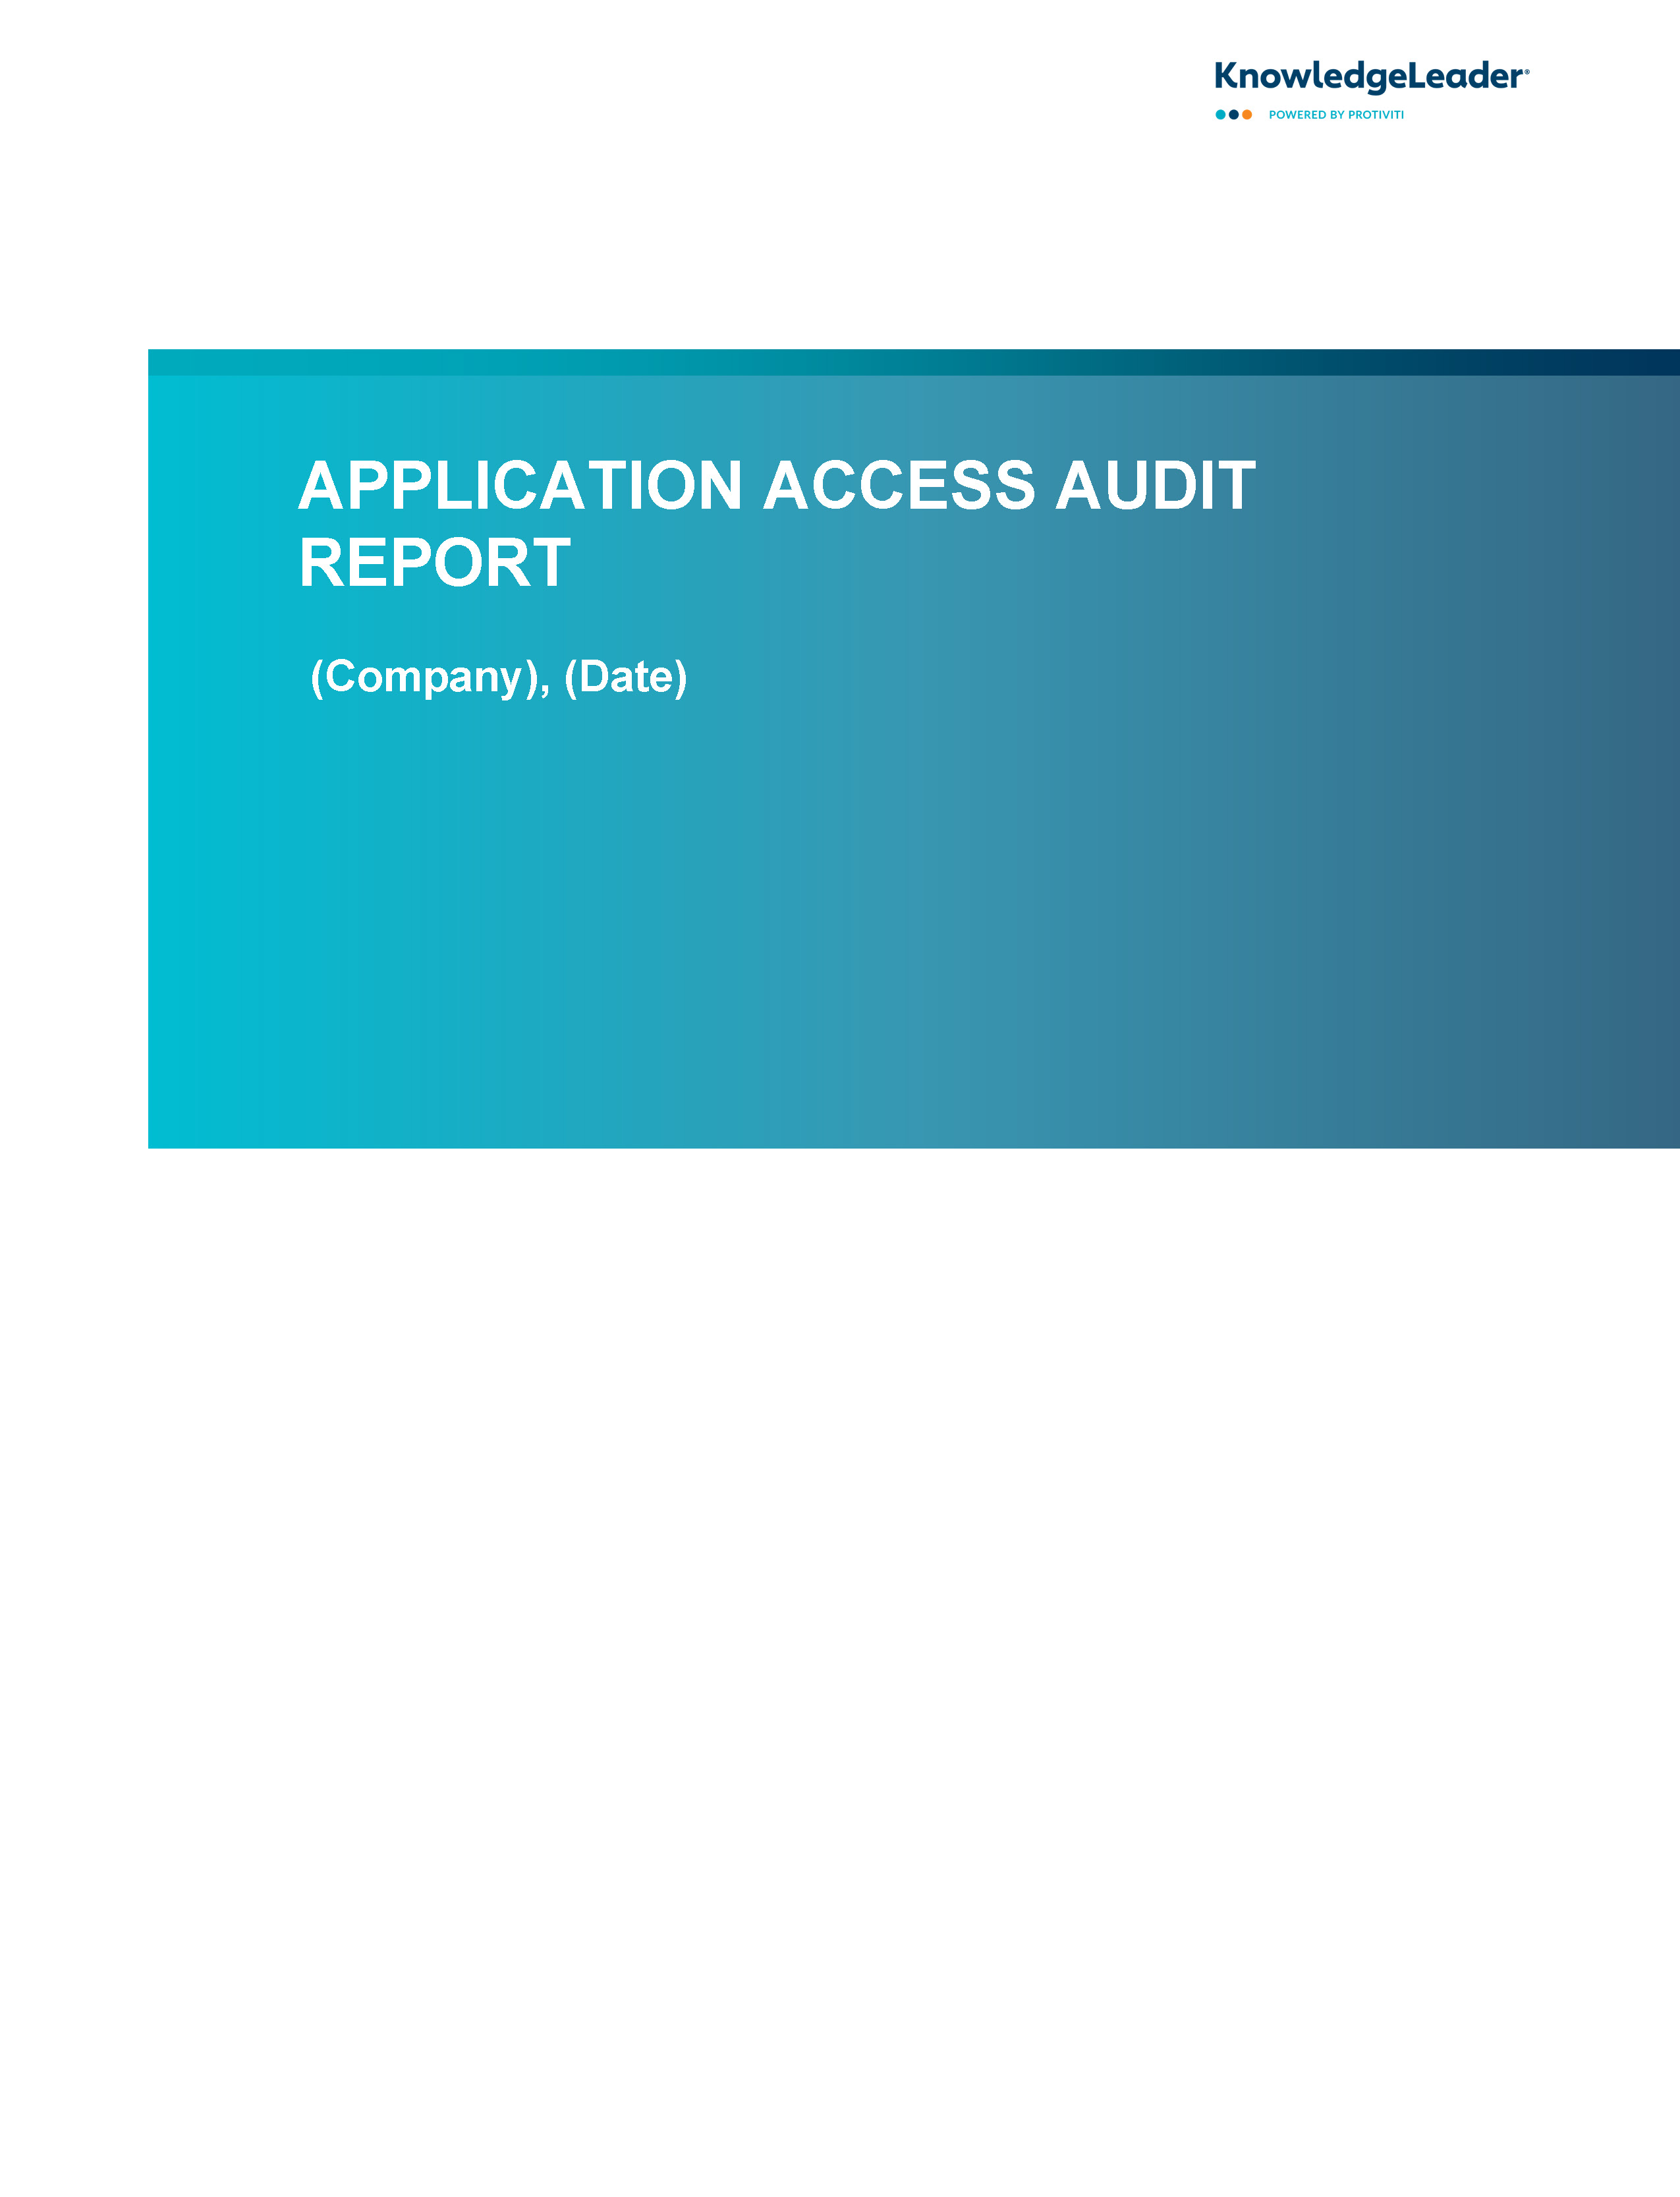 Screenshot of the first page of Application Access Audit Report